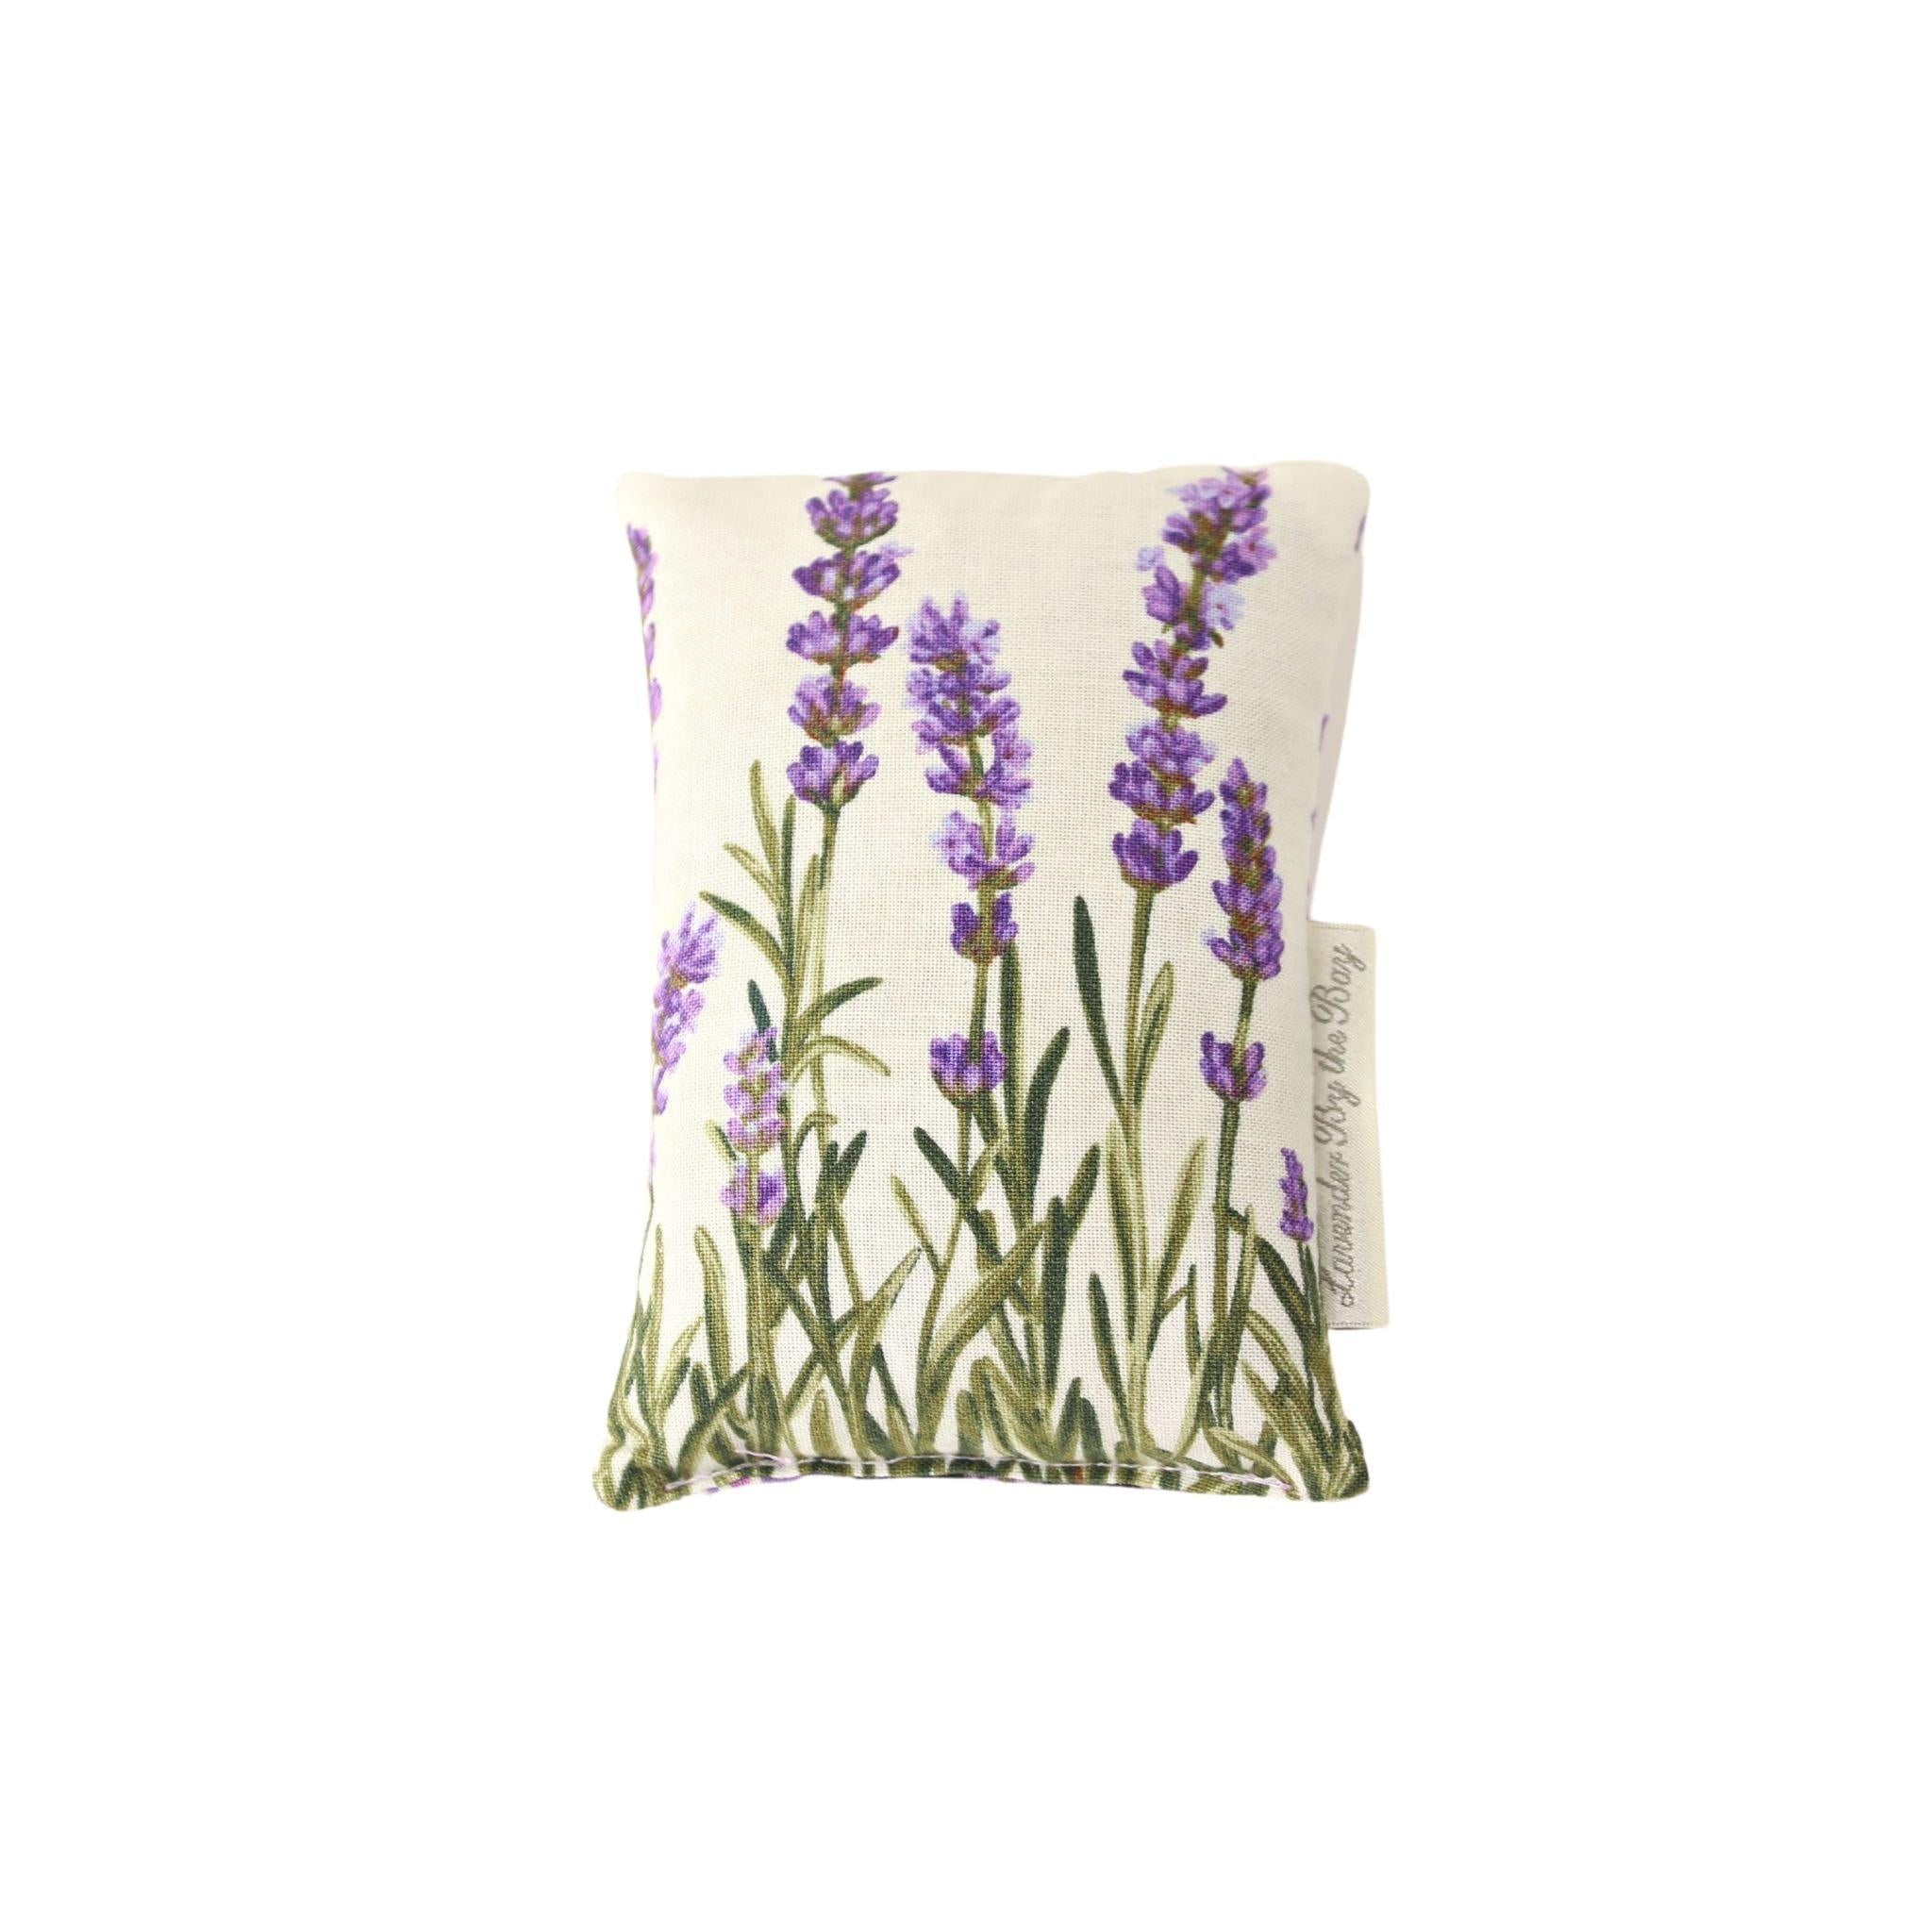 https://cdn.shopify.com/s/files/1/1228/1034/products/blooming-lavender-sachet-lavender-by-the-bay.jpg?v=1665241918&width=2048